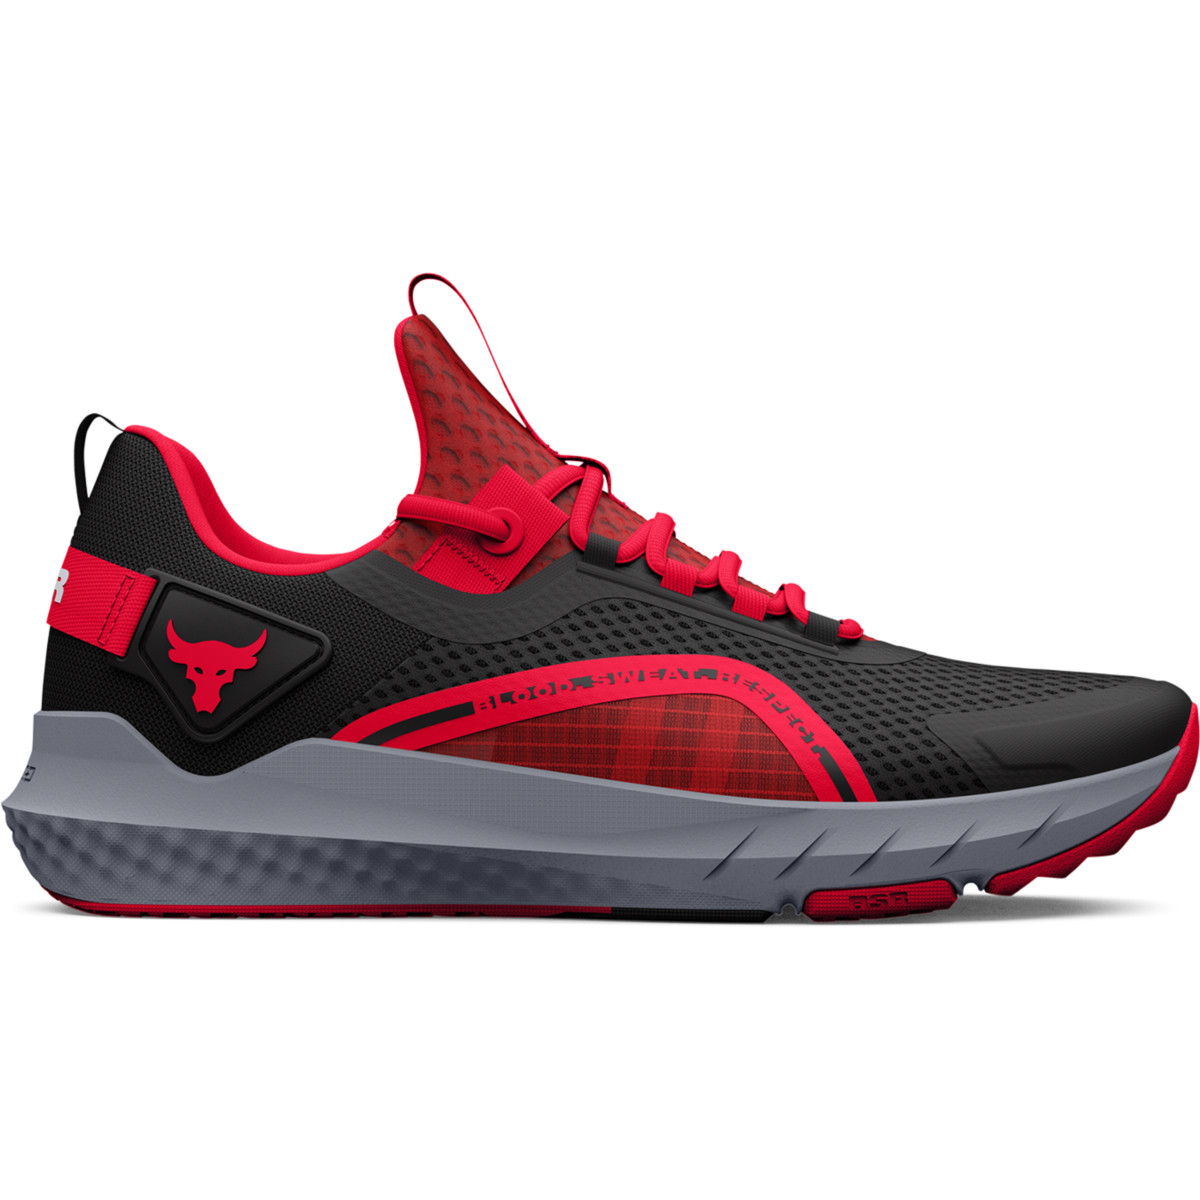 Under Armour - 3026462 UA PROJECT ROCK BSR 3 - 004/7443 Ανδρικά > Παπούτσια > Αθλητικά > Παπούτσι Low Cut